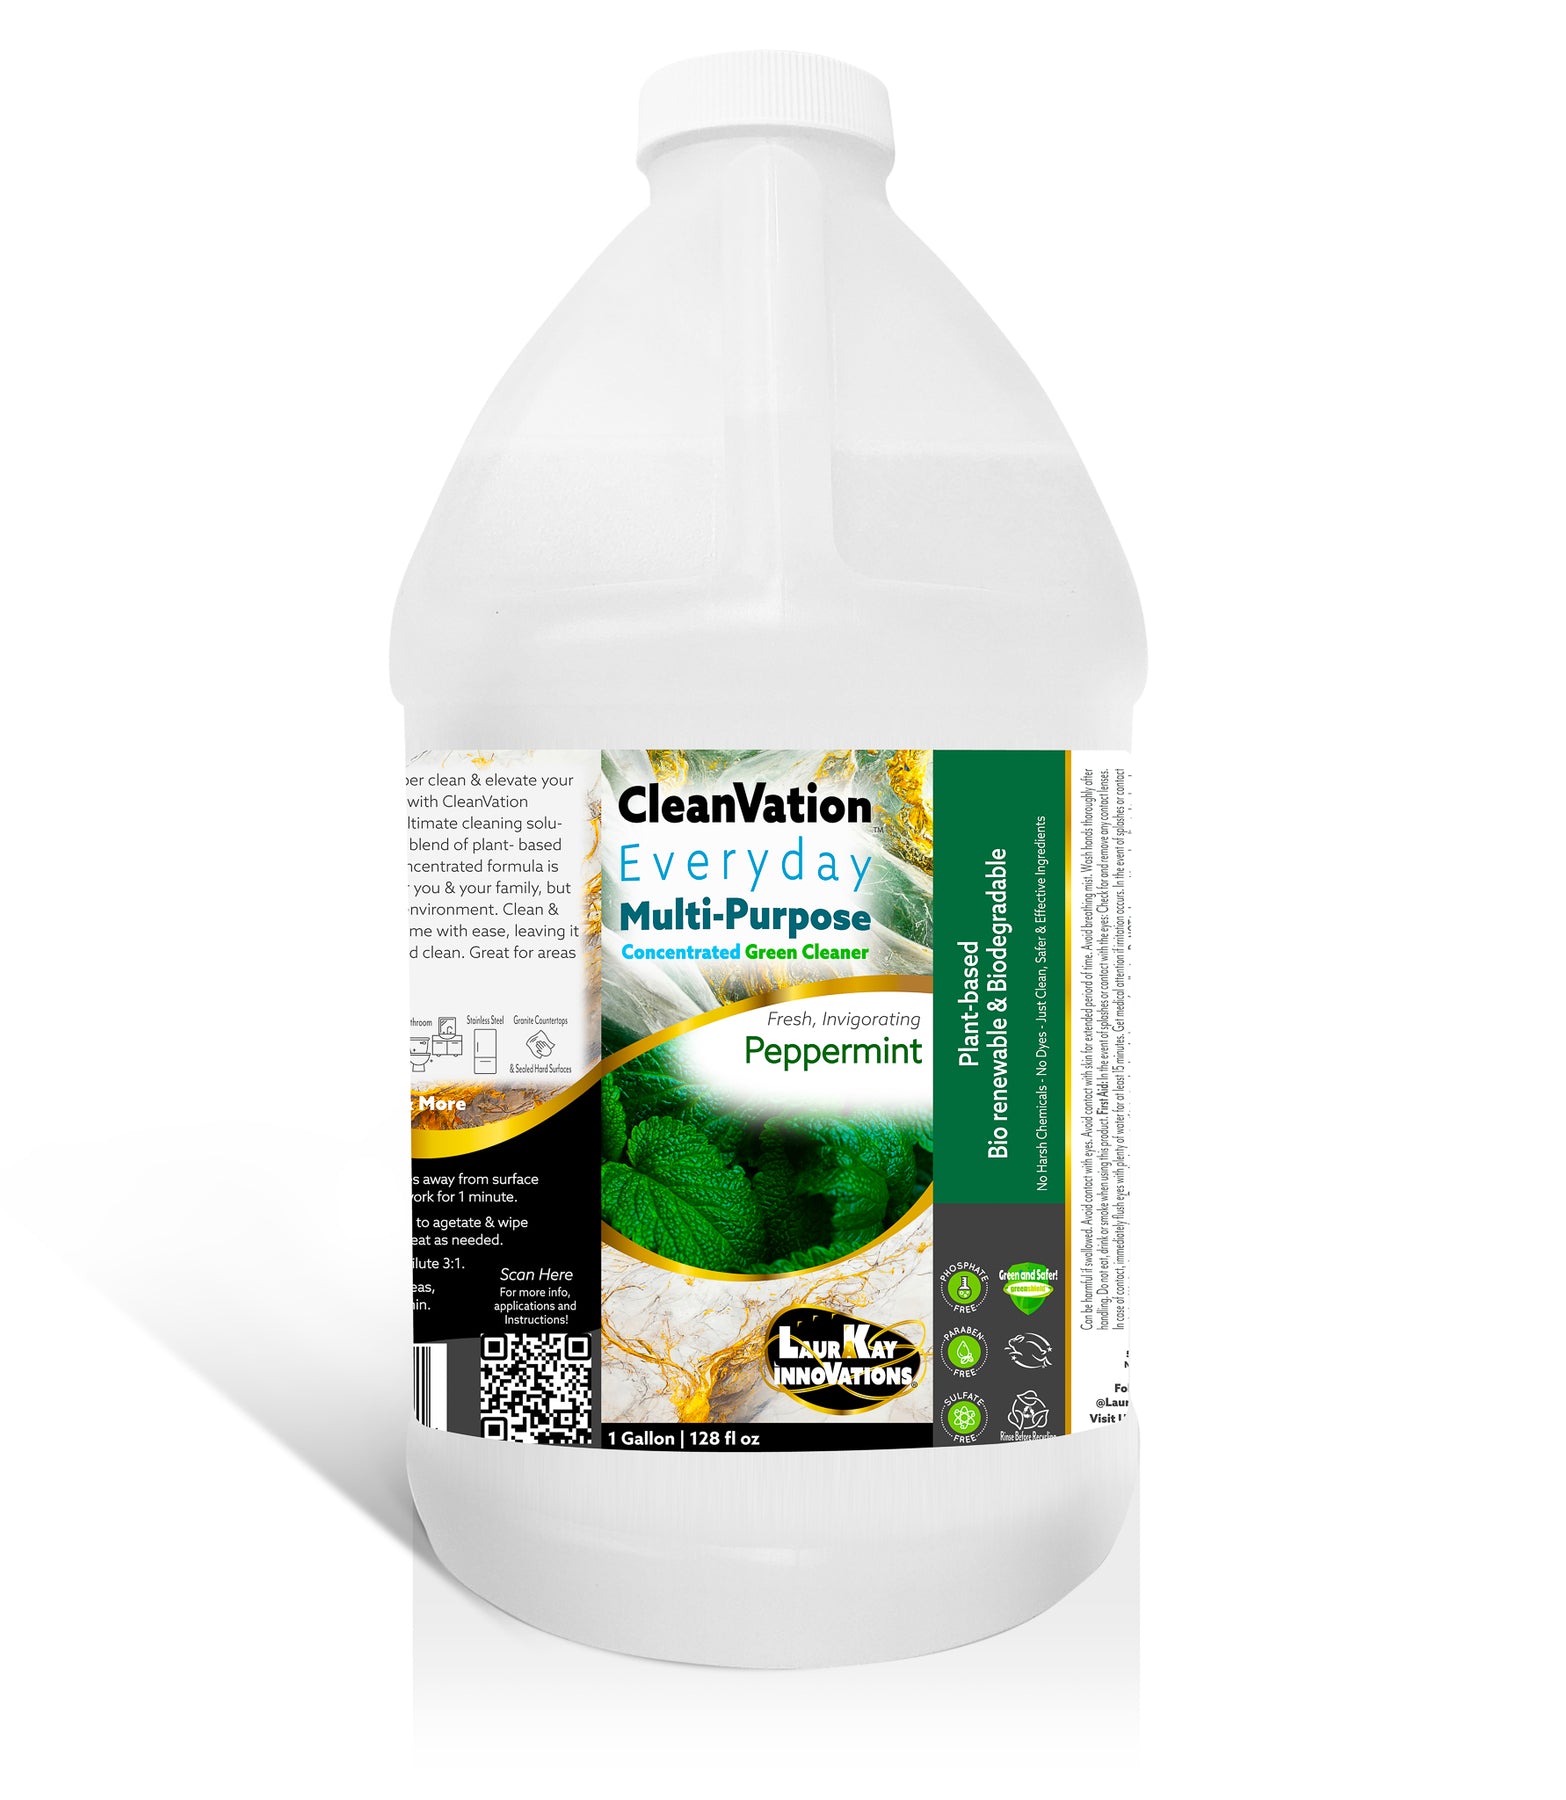 HandySani Spray and Gentle Plant Based Foaming Hand Soap - Double